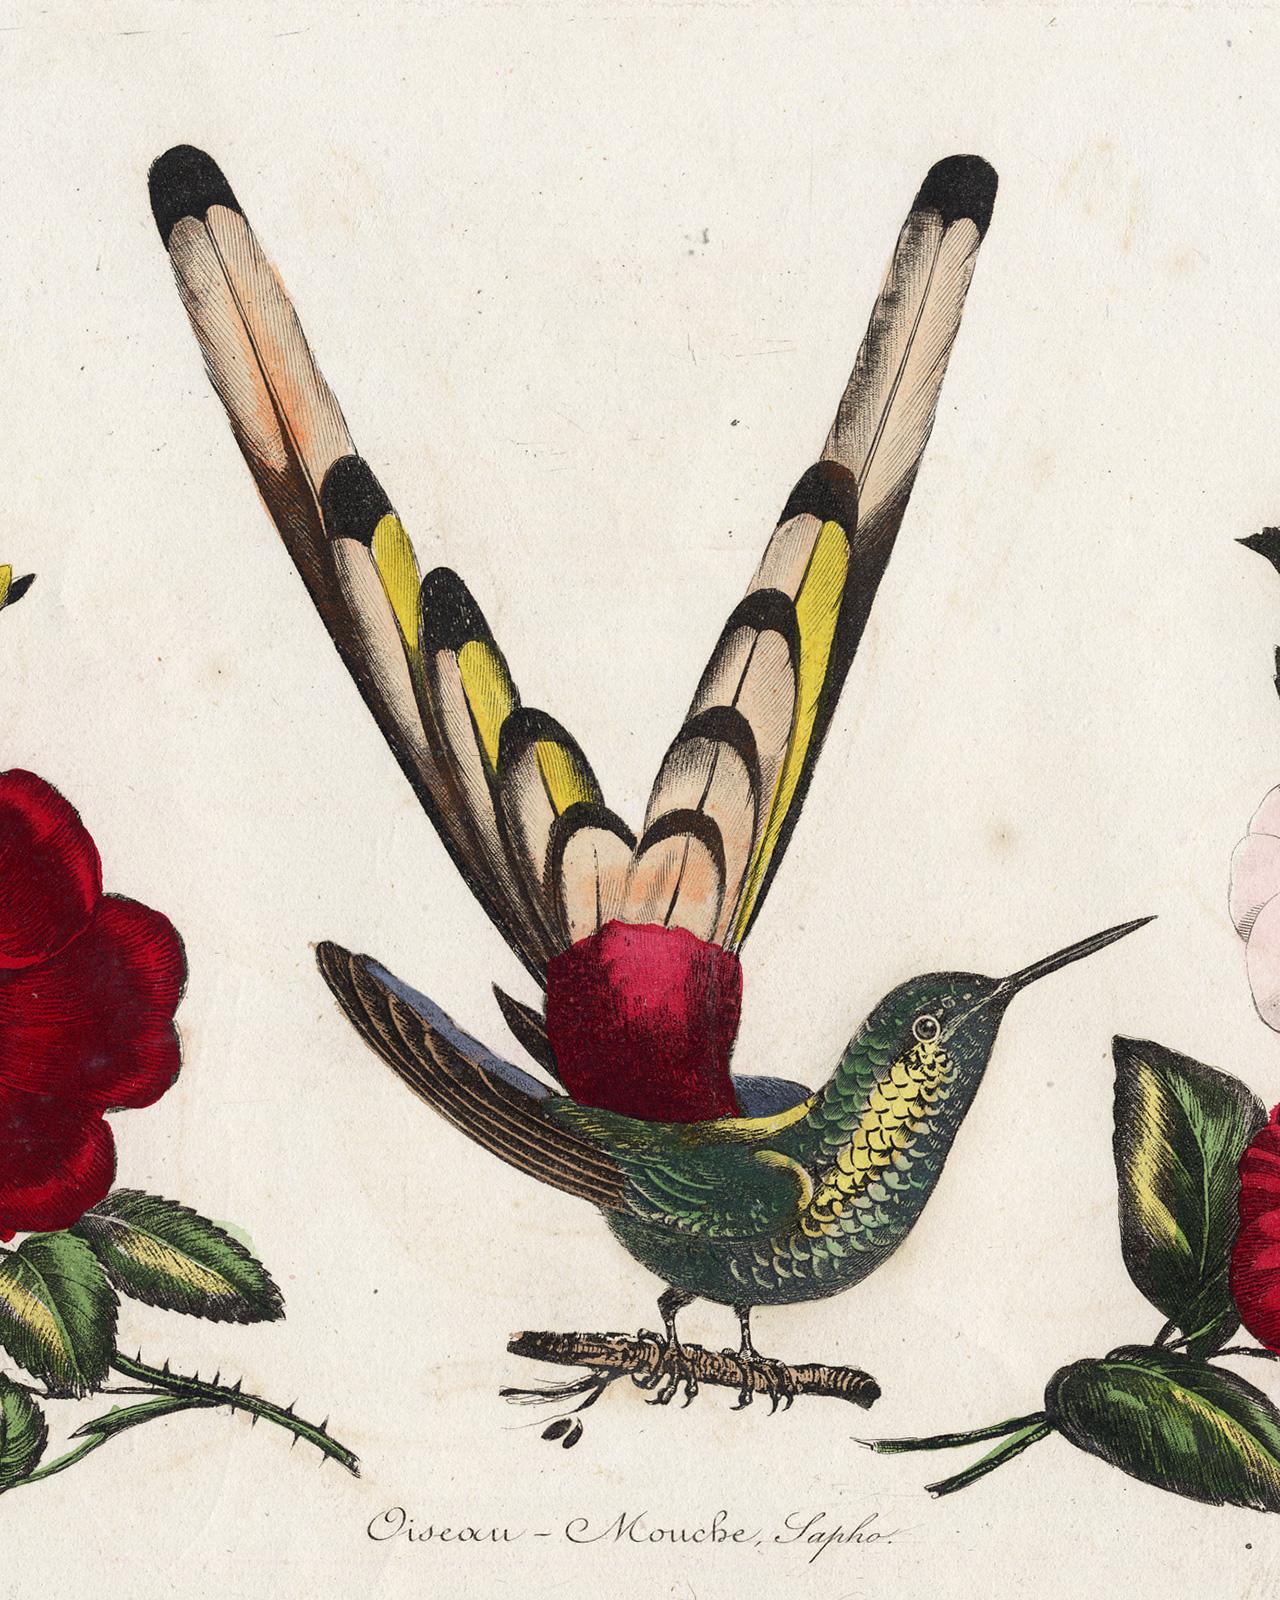 The Saphire Mouthed Hummingbird by Pauquet - Hand coloured engraving - 19th c - Beige Animal Print by Hippolyte Louis Emile Pauquet and Polydore Pauquet